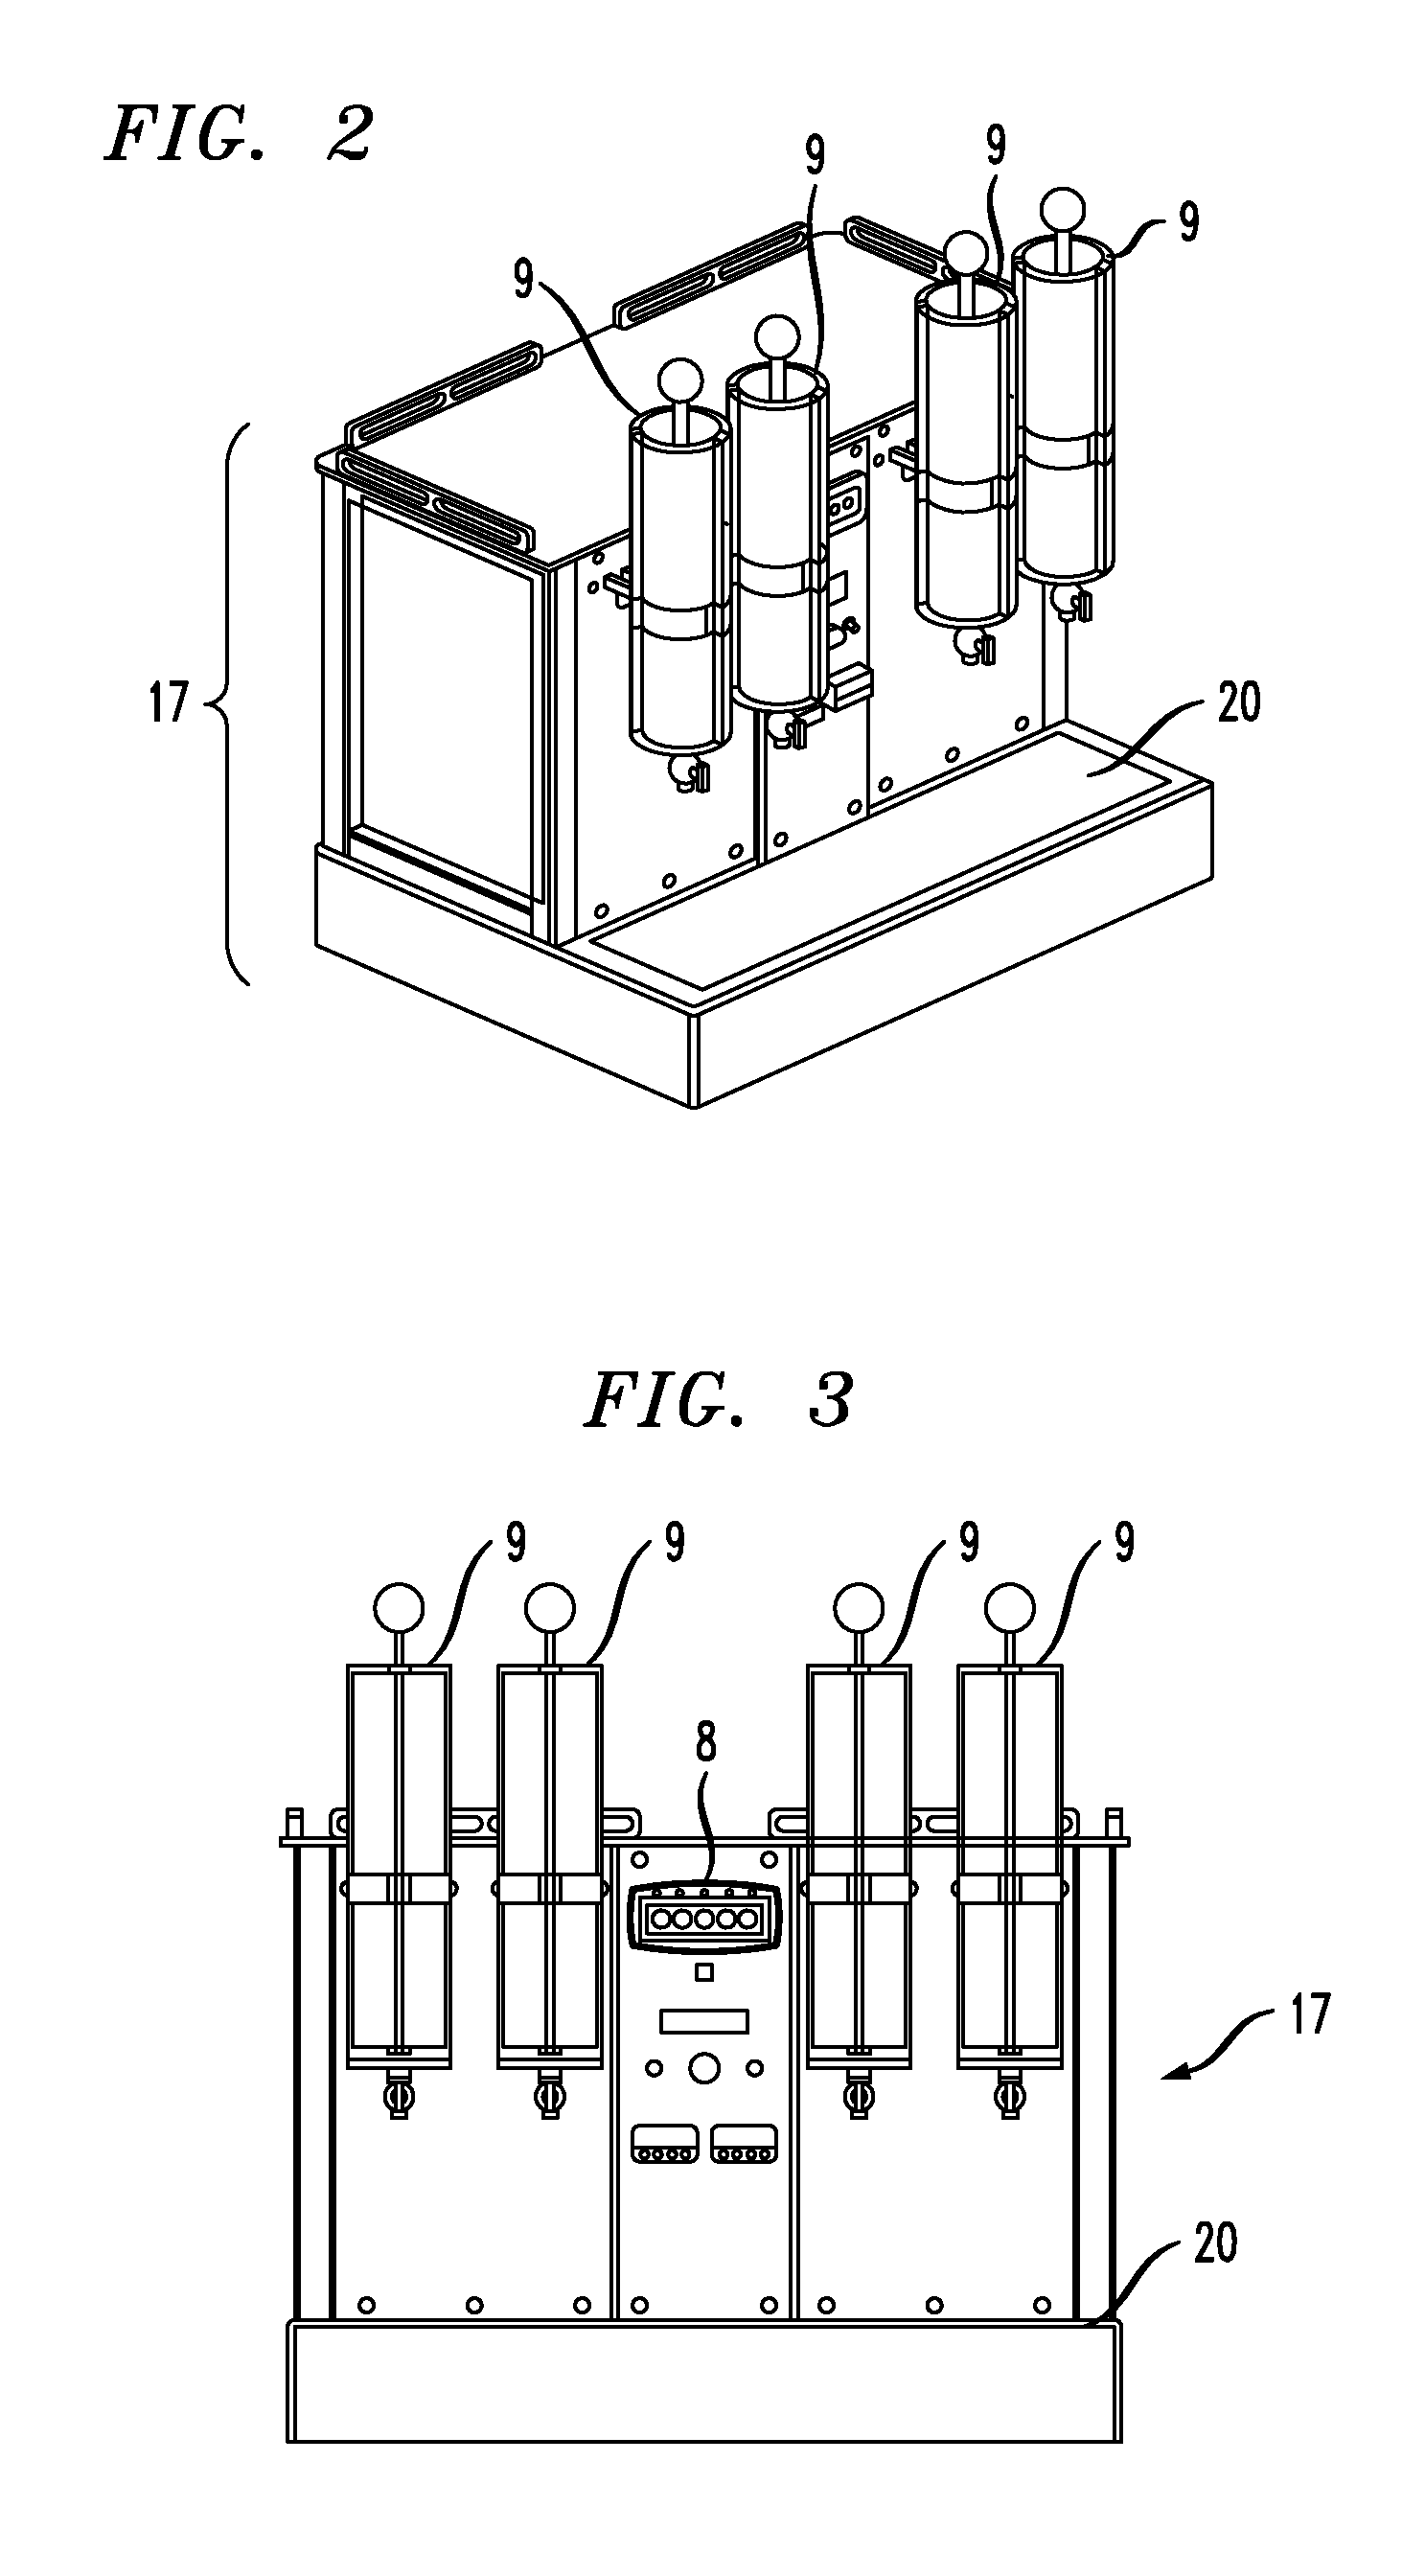 Hot beverage brewing system and use thereof